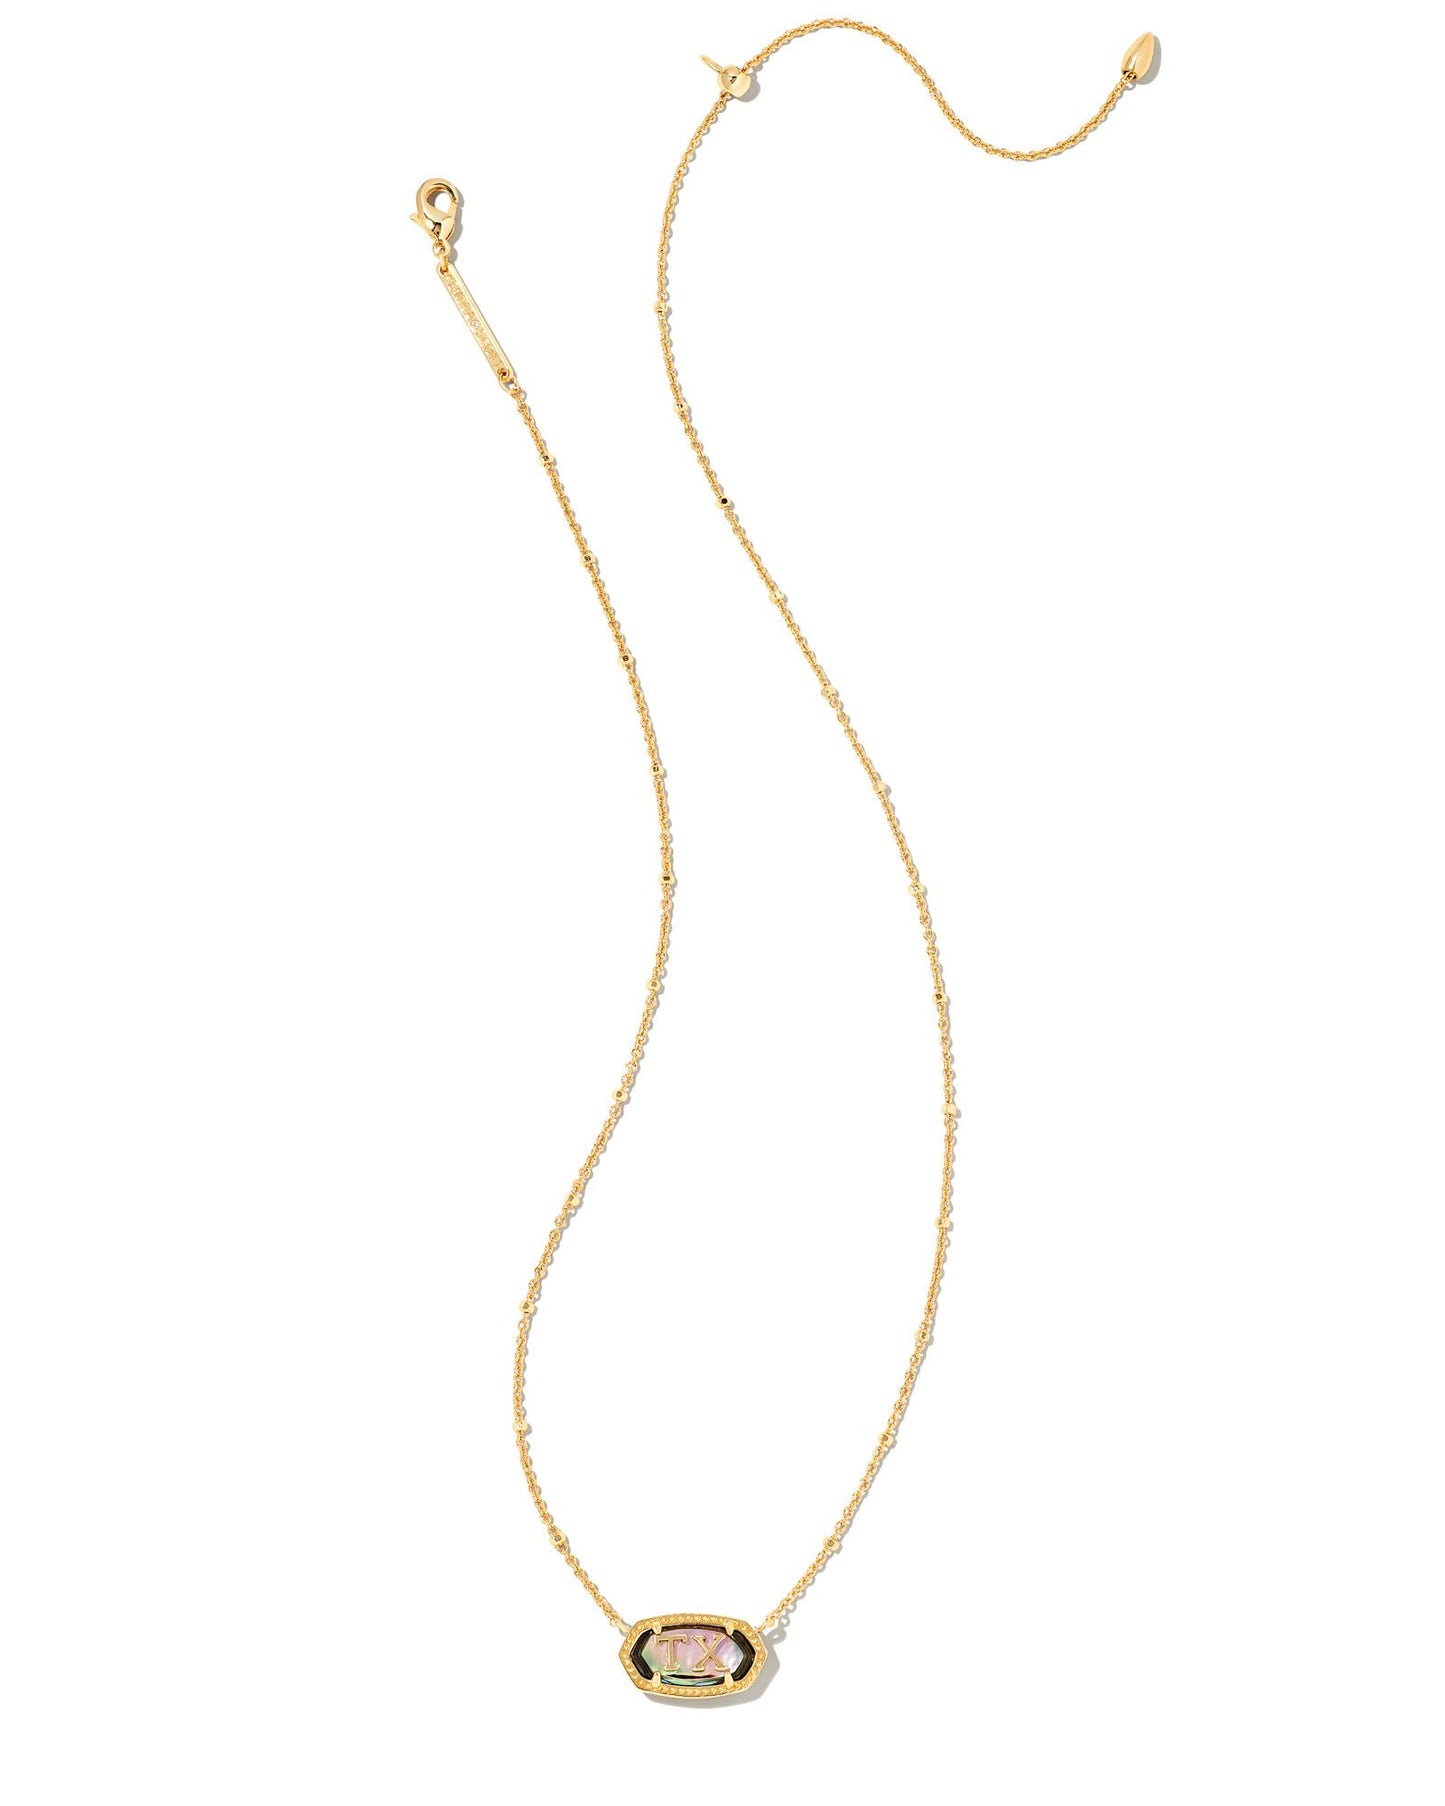 Elisa Texas Necklace - Gold Abalone Shell